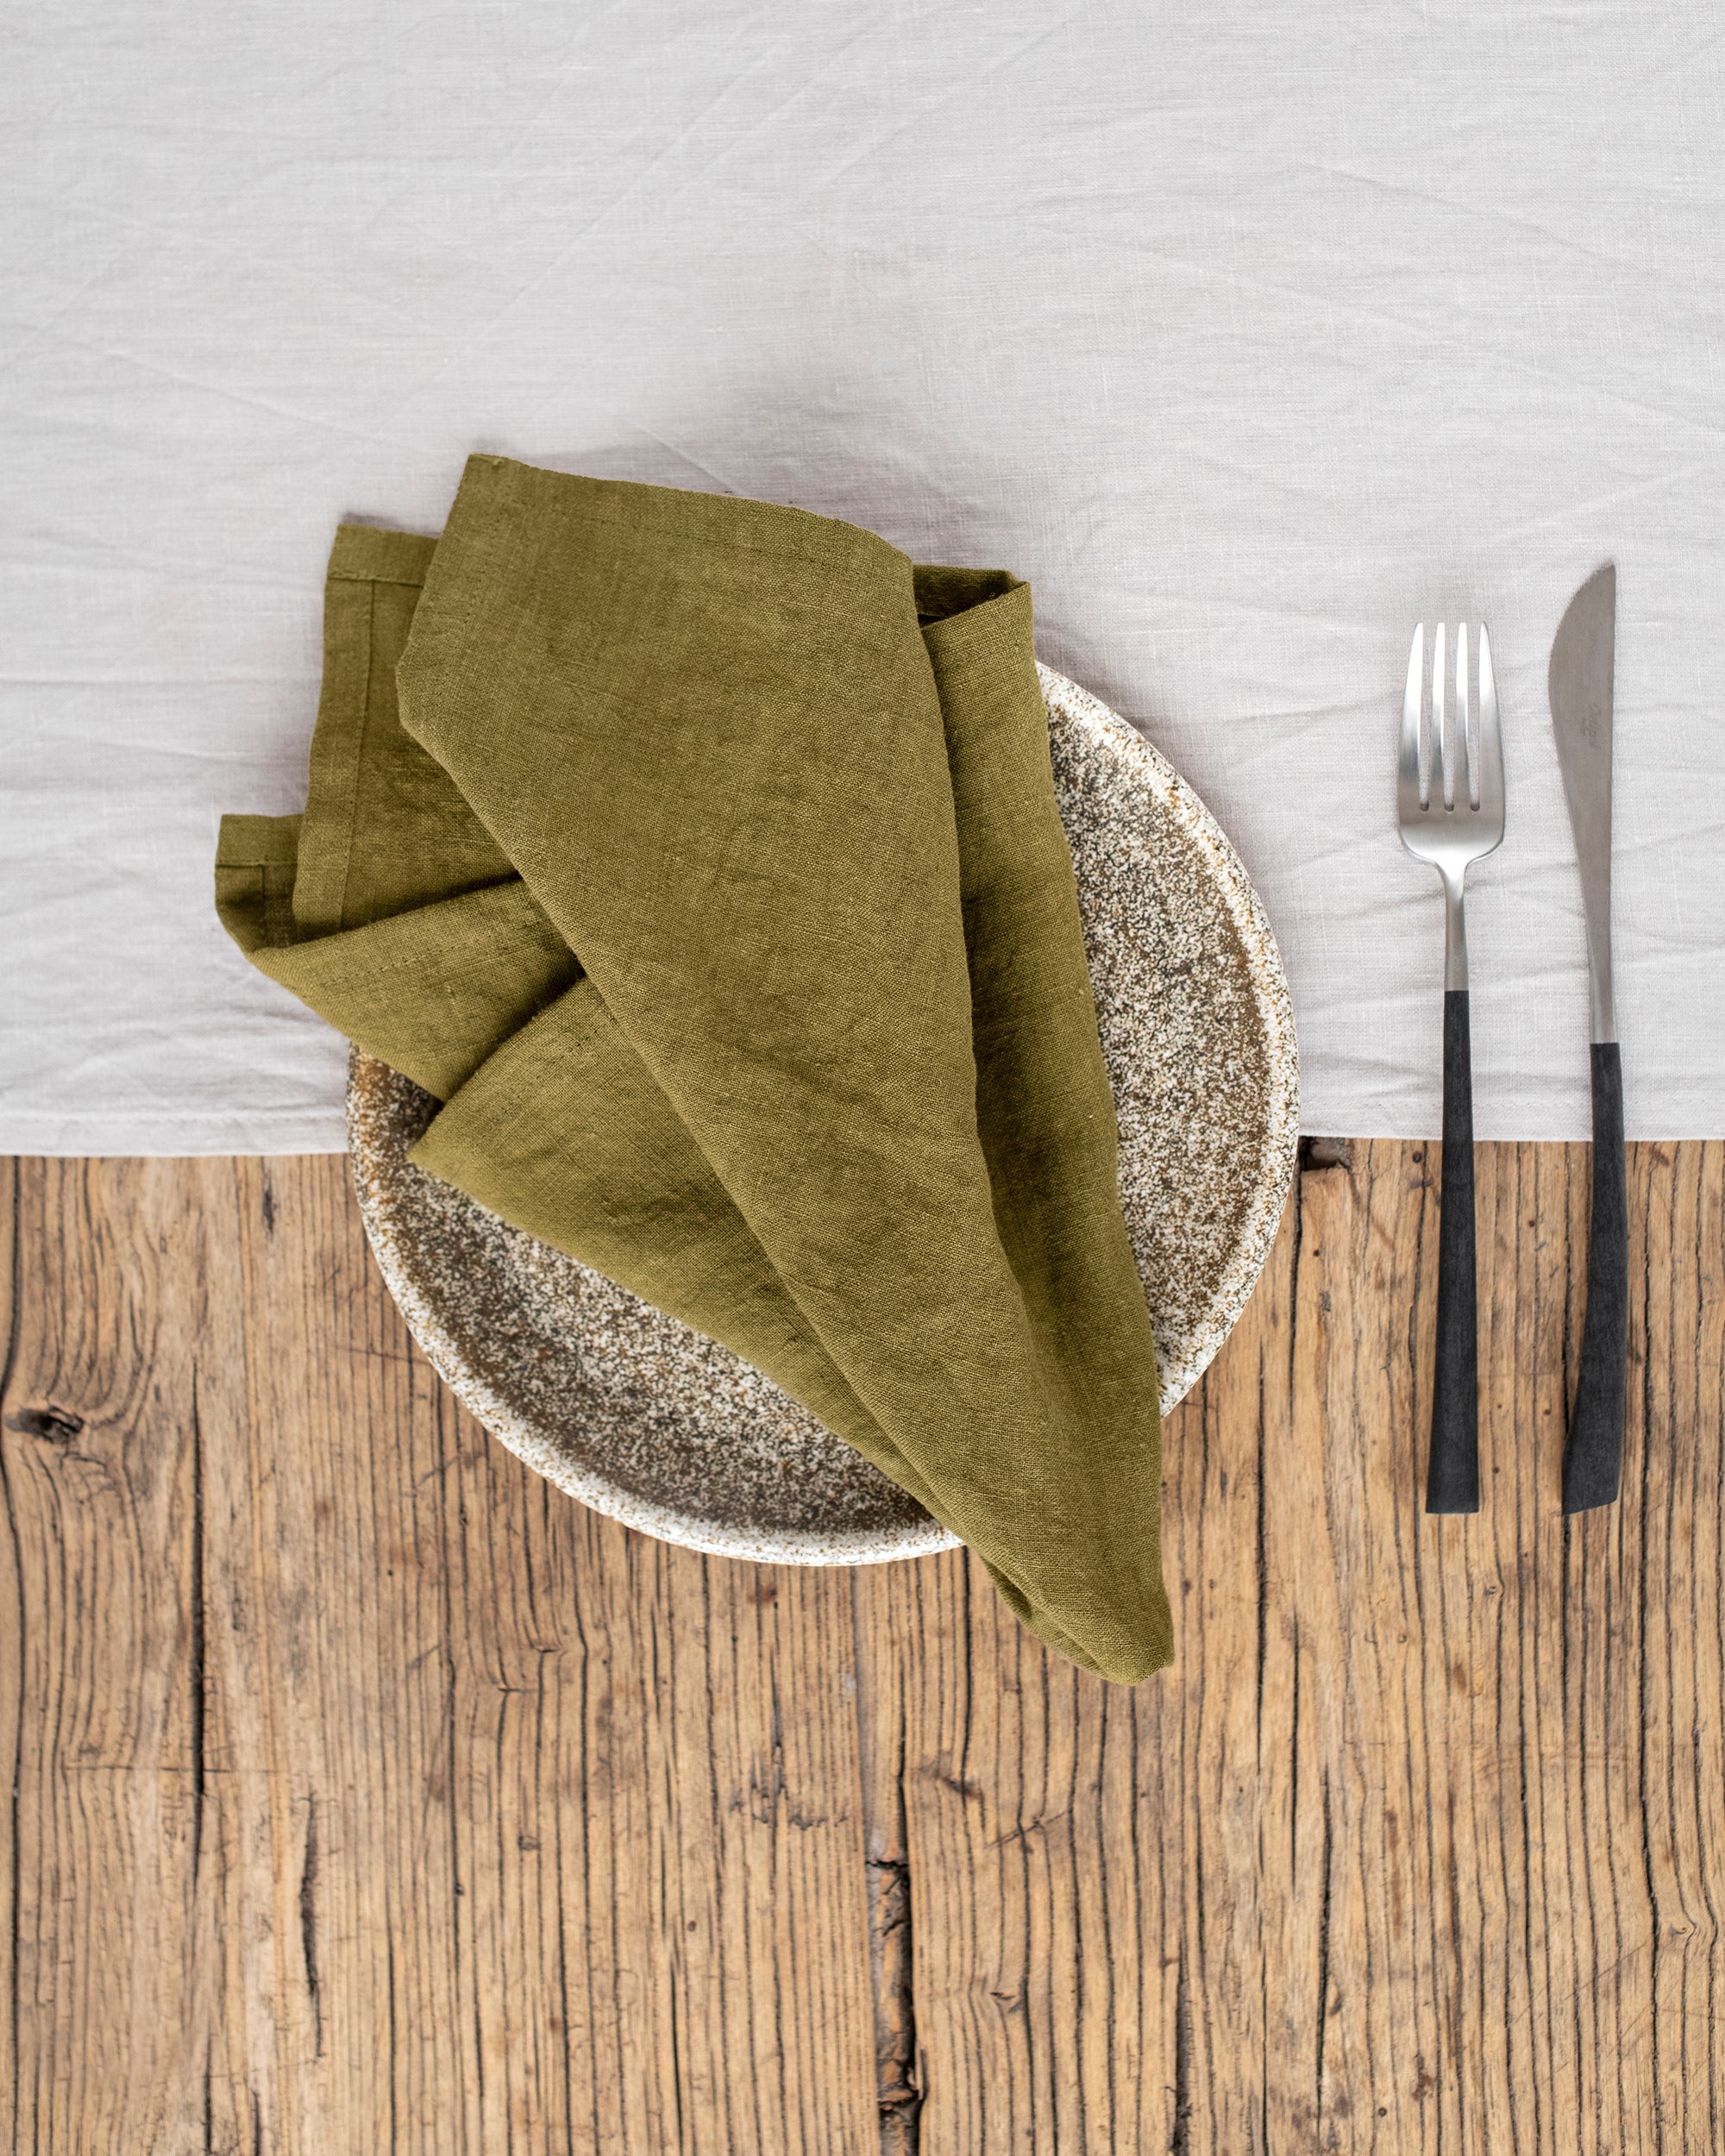 MagicLinen Napkin Set in Olive Green at Urban Outfitters